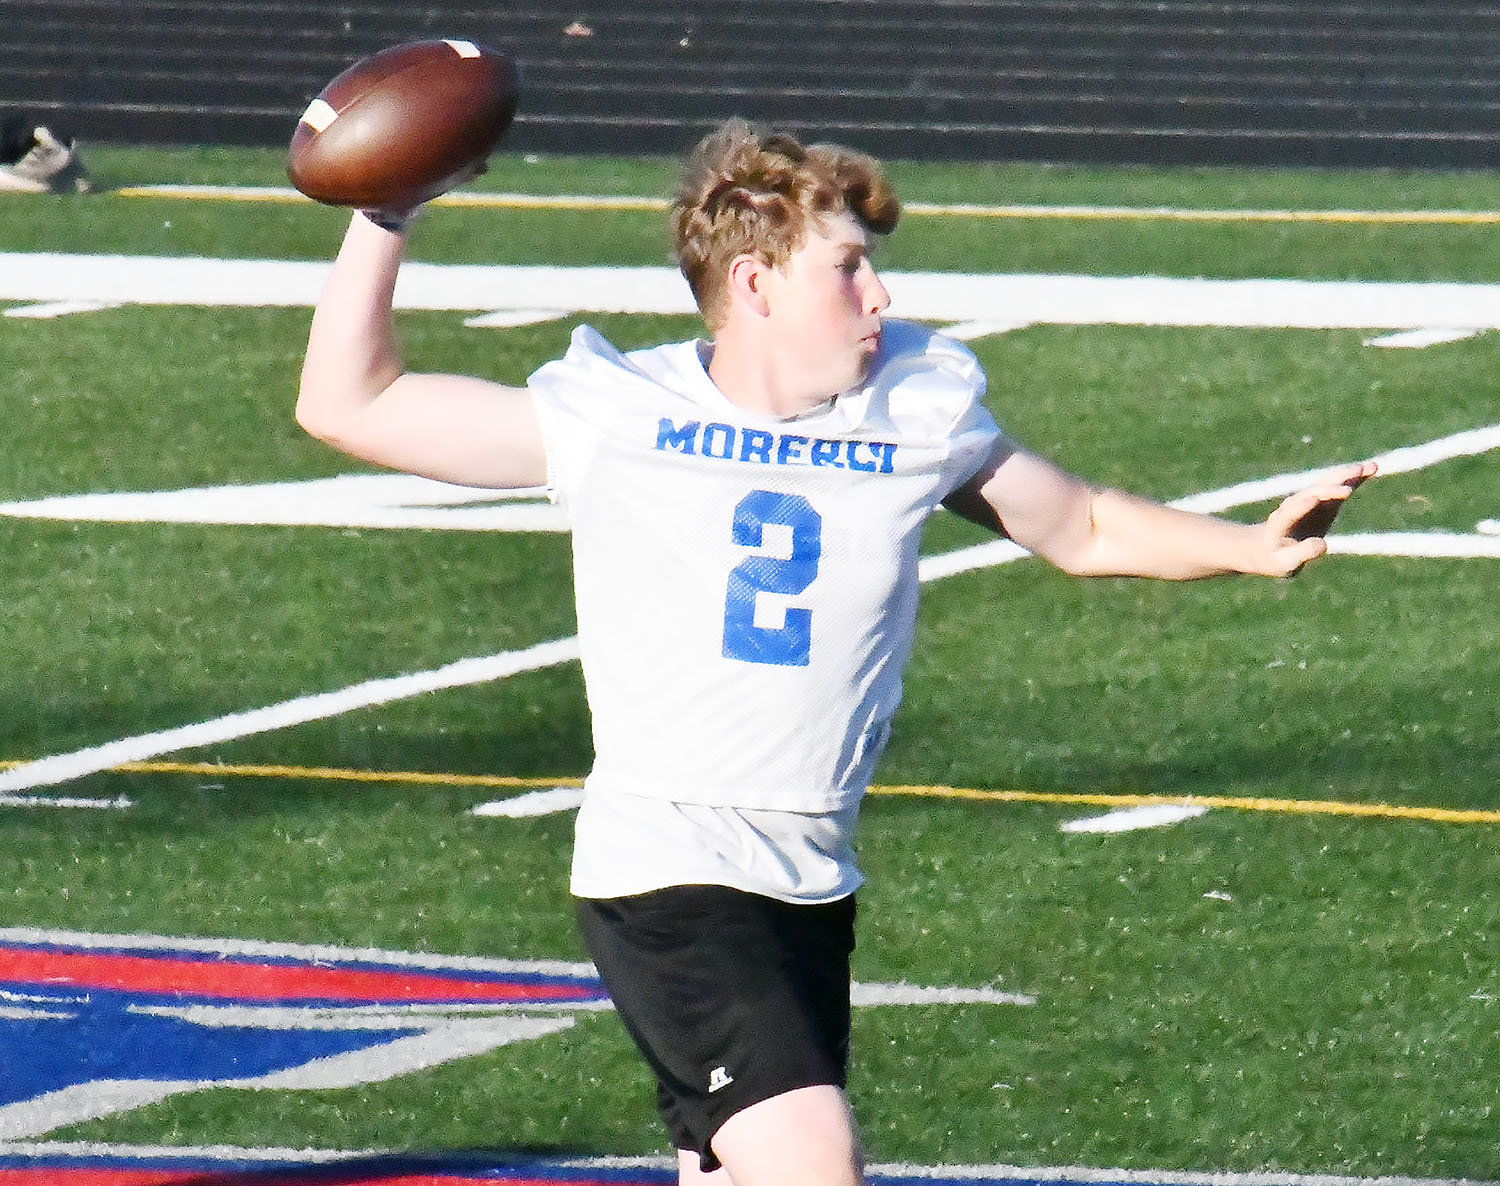 Jackson Engel received some reps at quarterback for Moberly during 7-on-7 league on June 22.